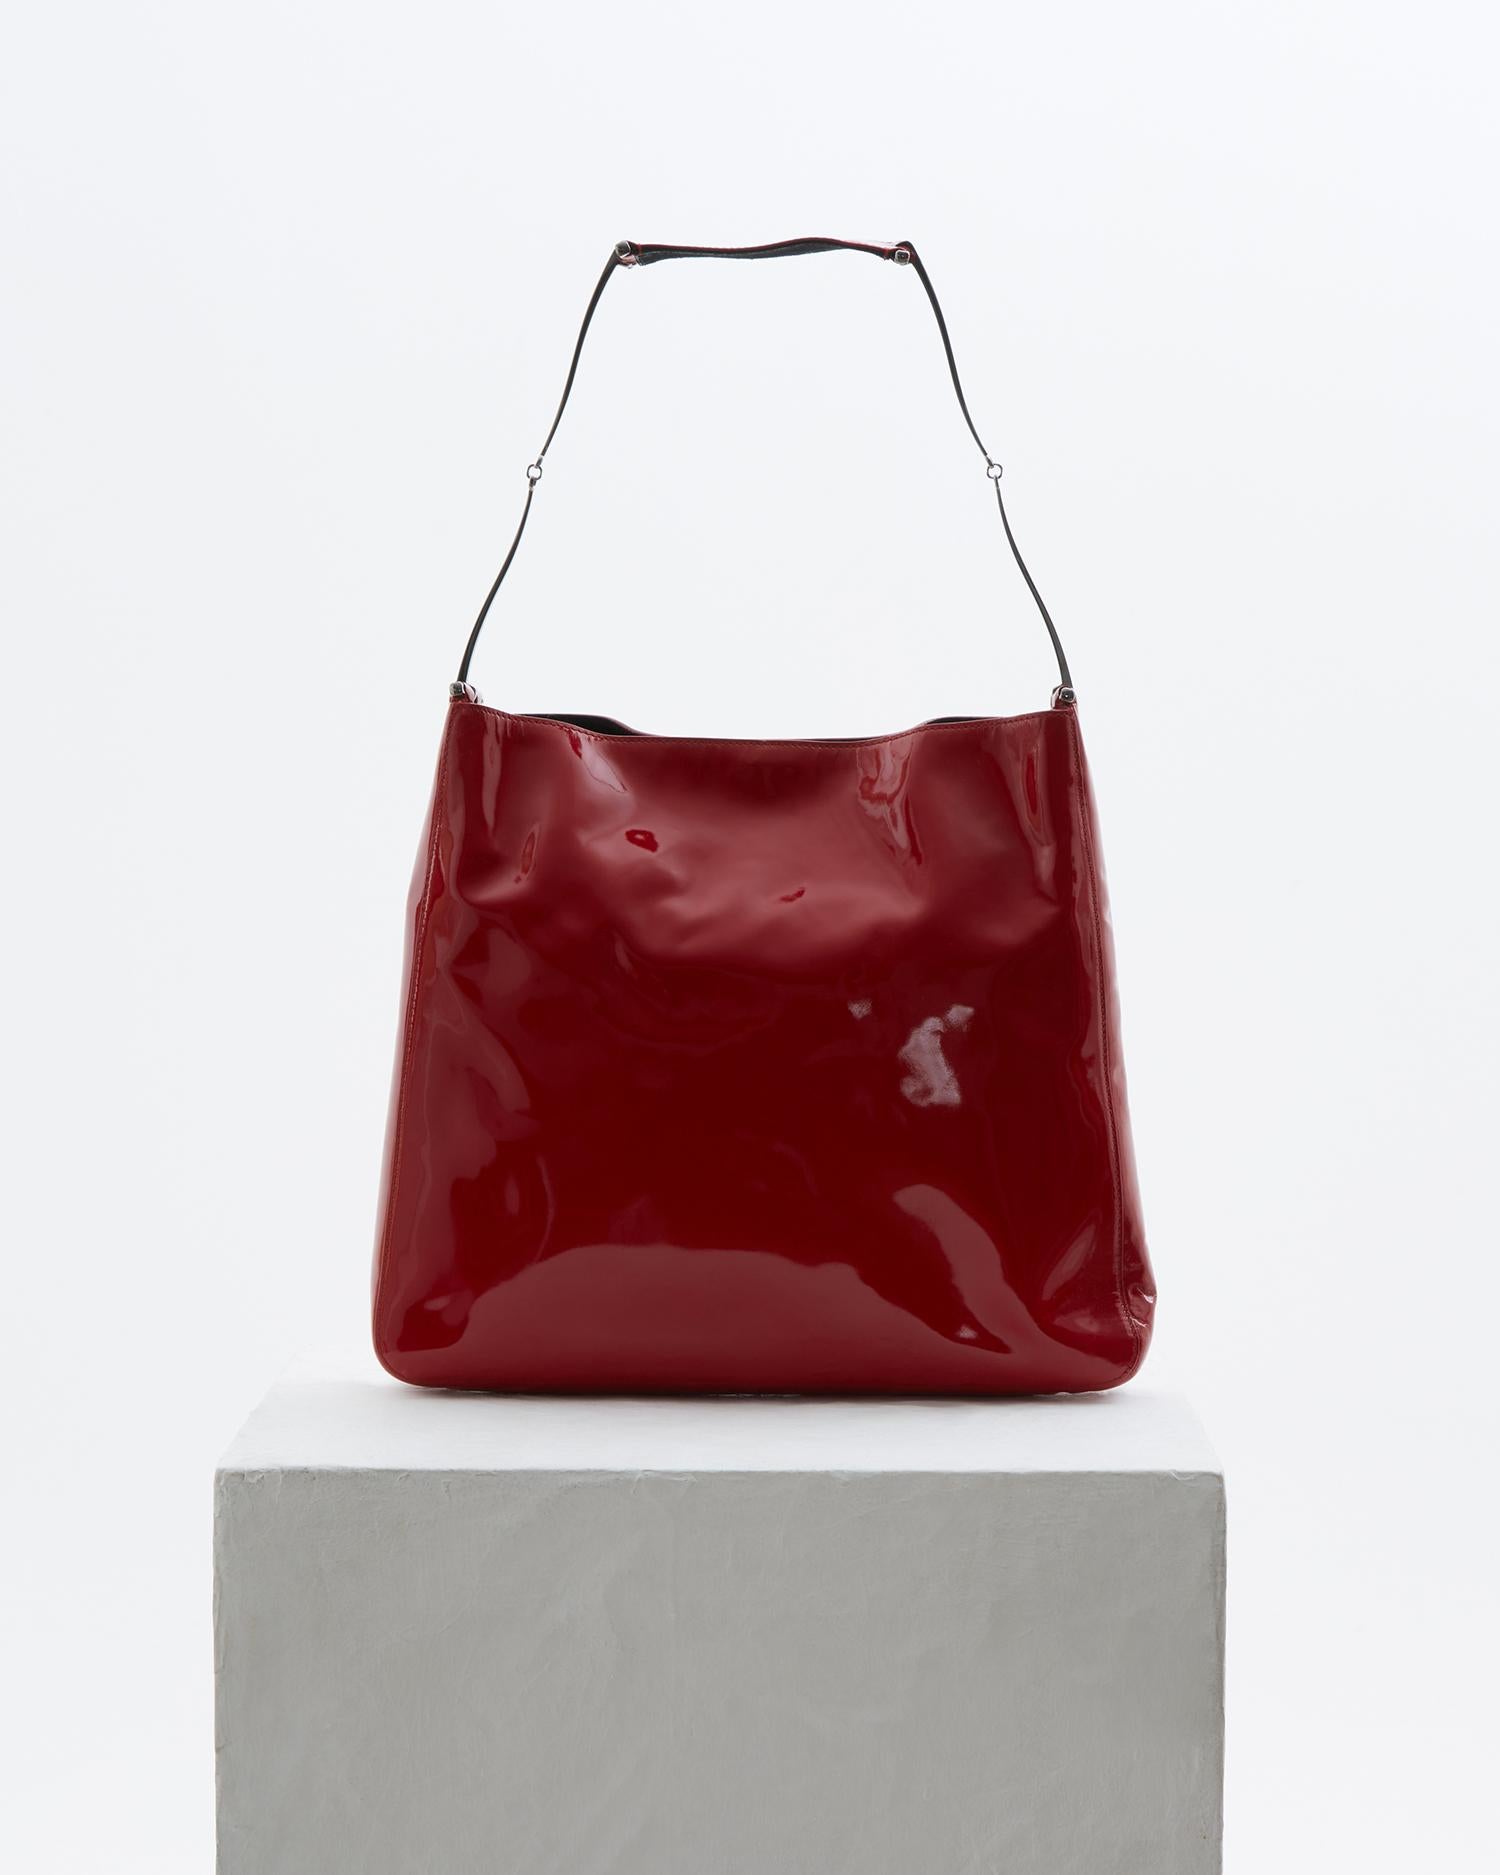 Women's Gucci by Tom Ford red patent leather metal ring shoulder bag, fw 1997 